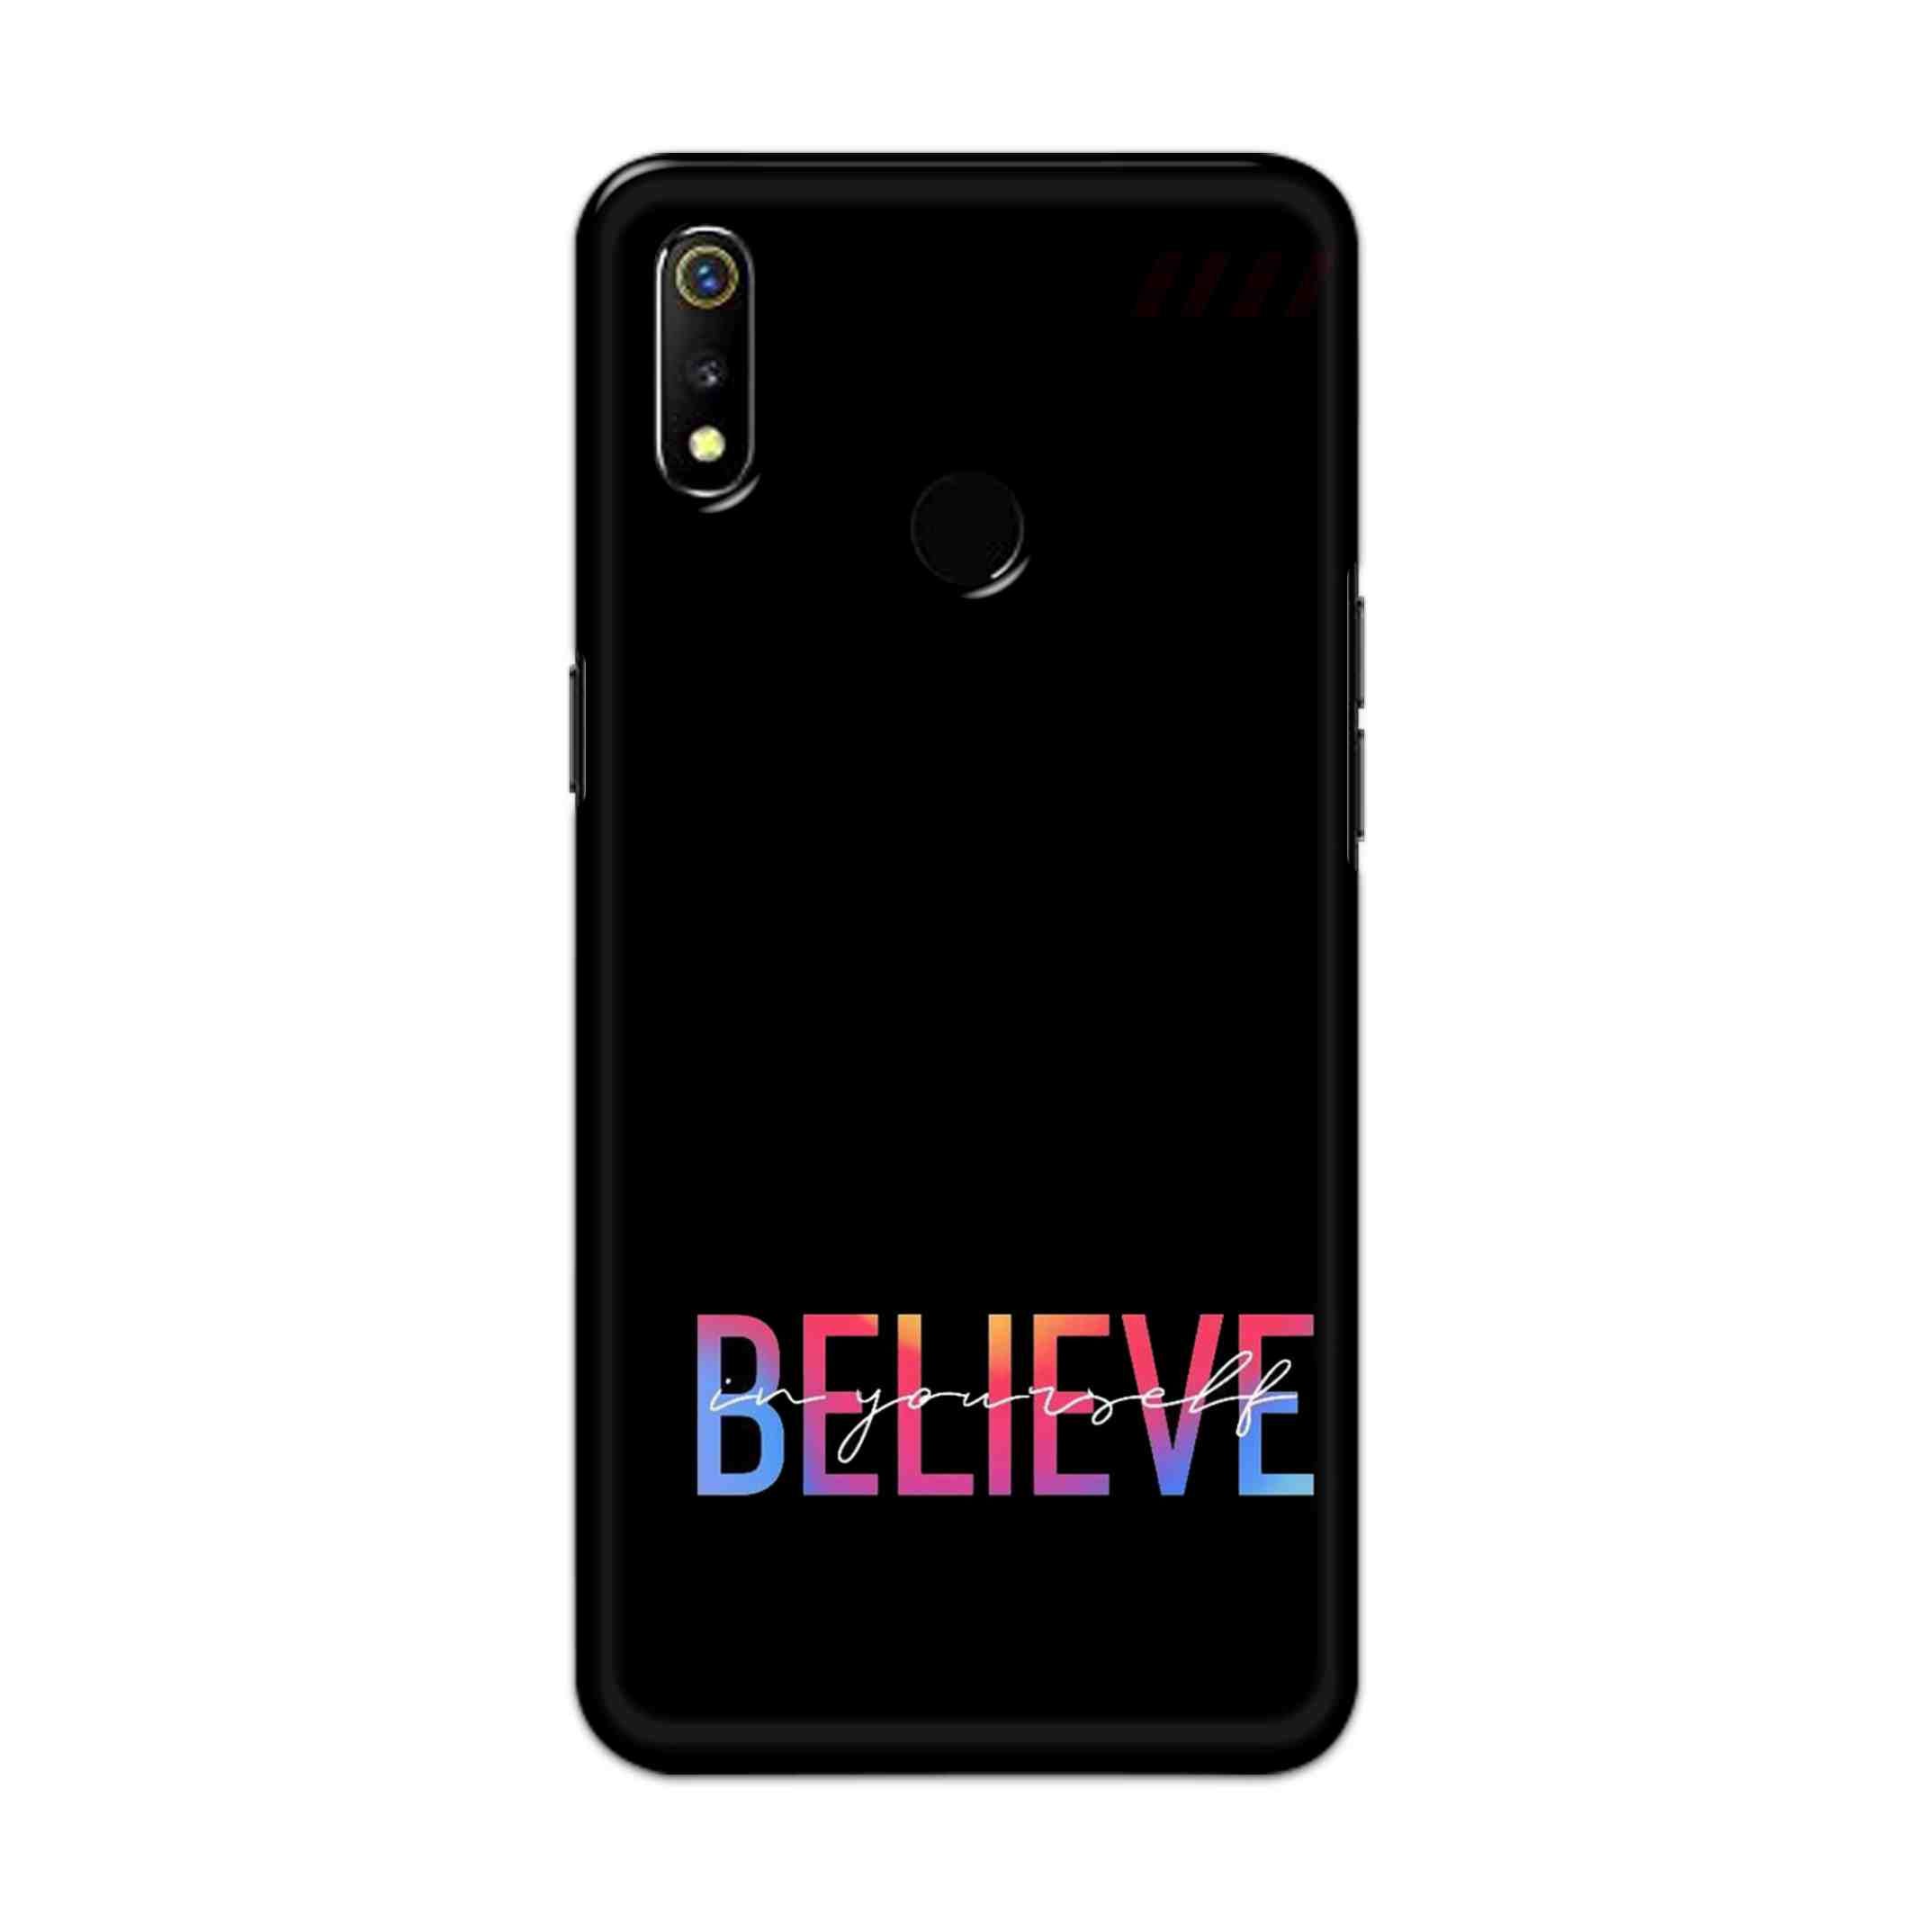 Buy Believe Hard Back Mobile Phone Case Cover For Oppo Realme 3 Online